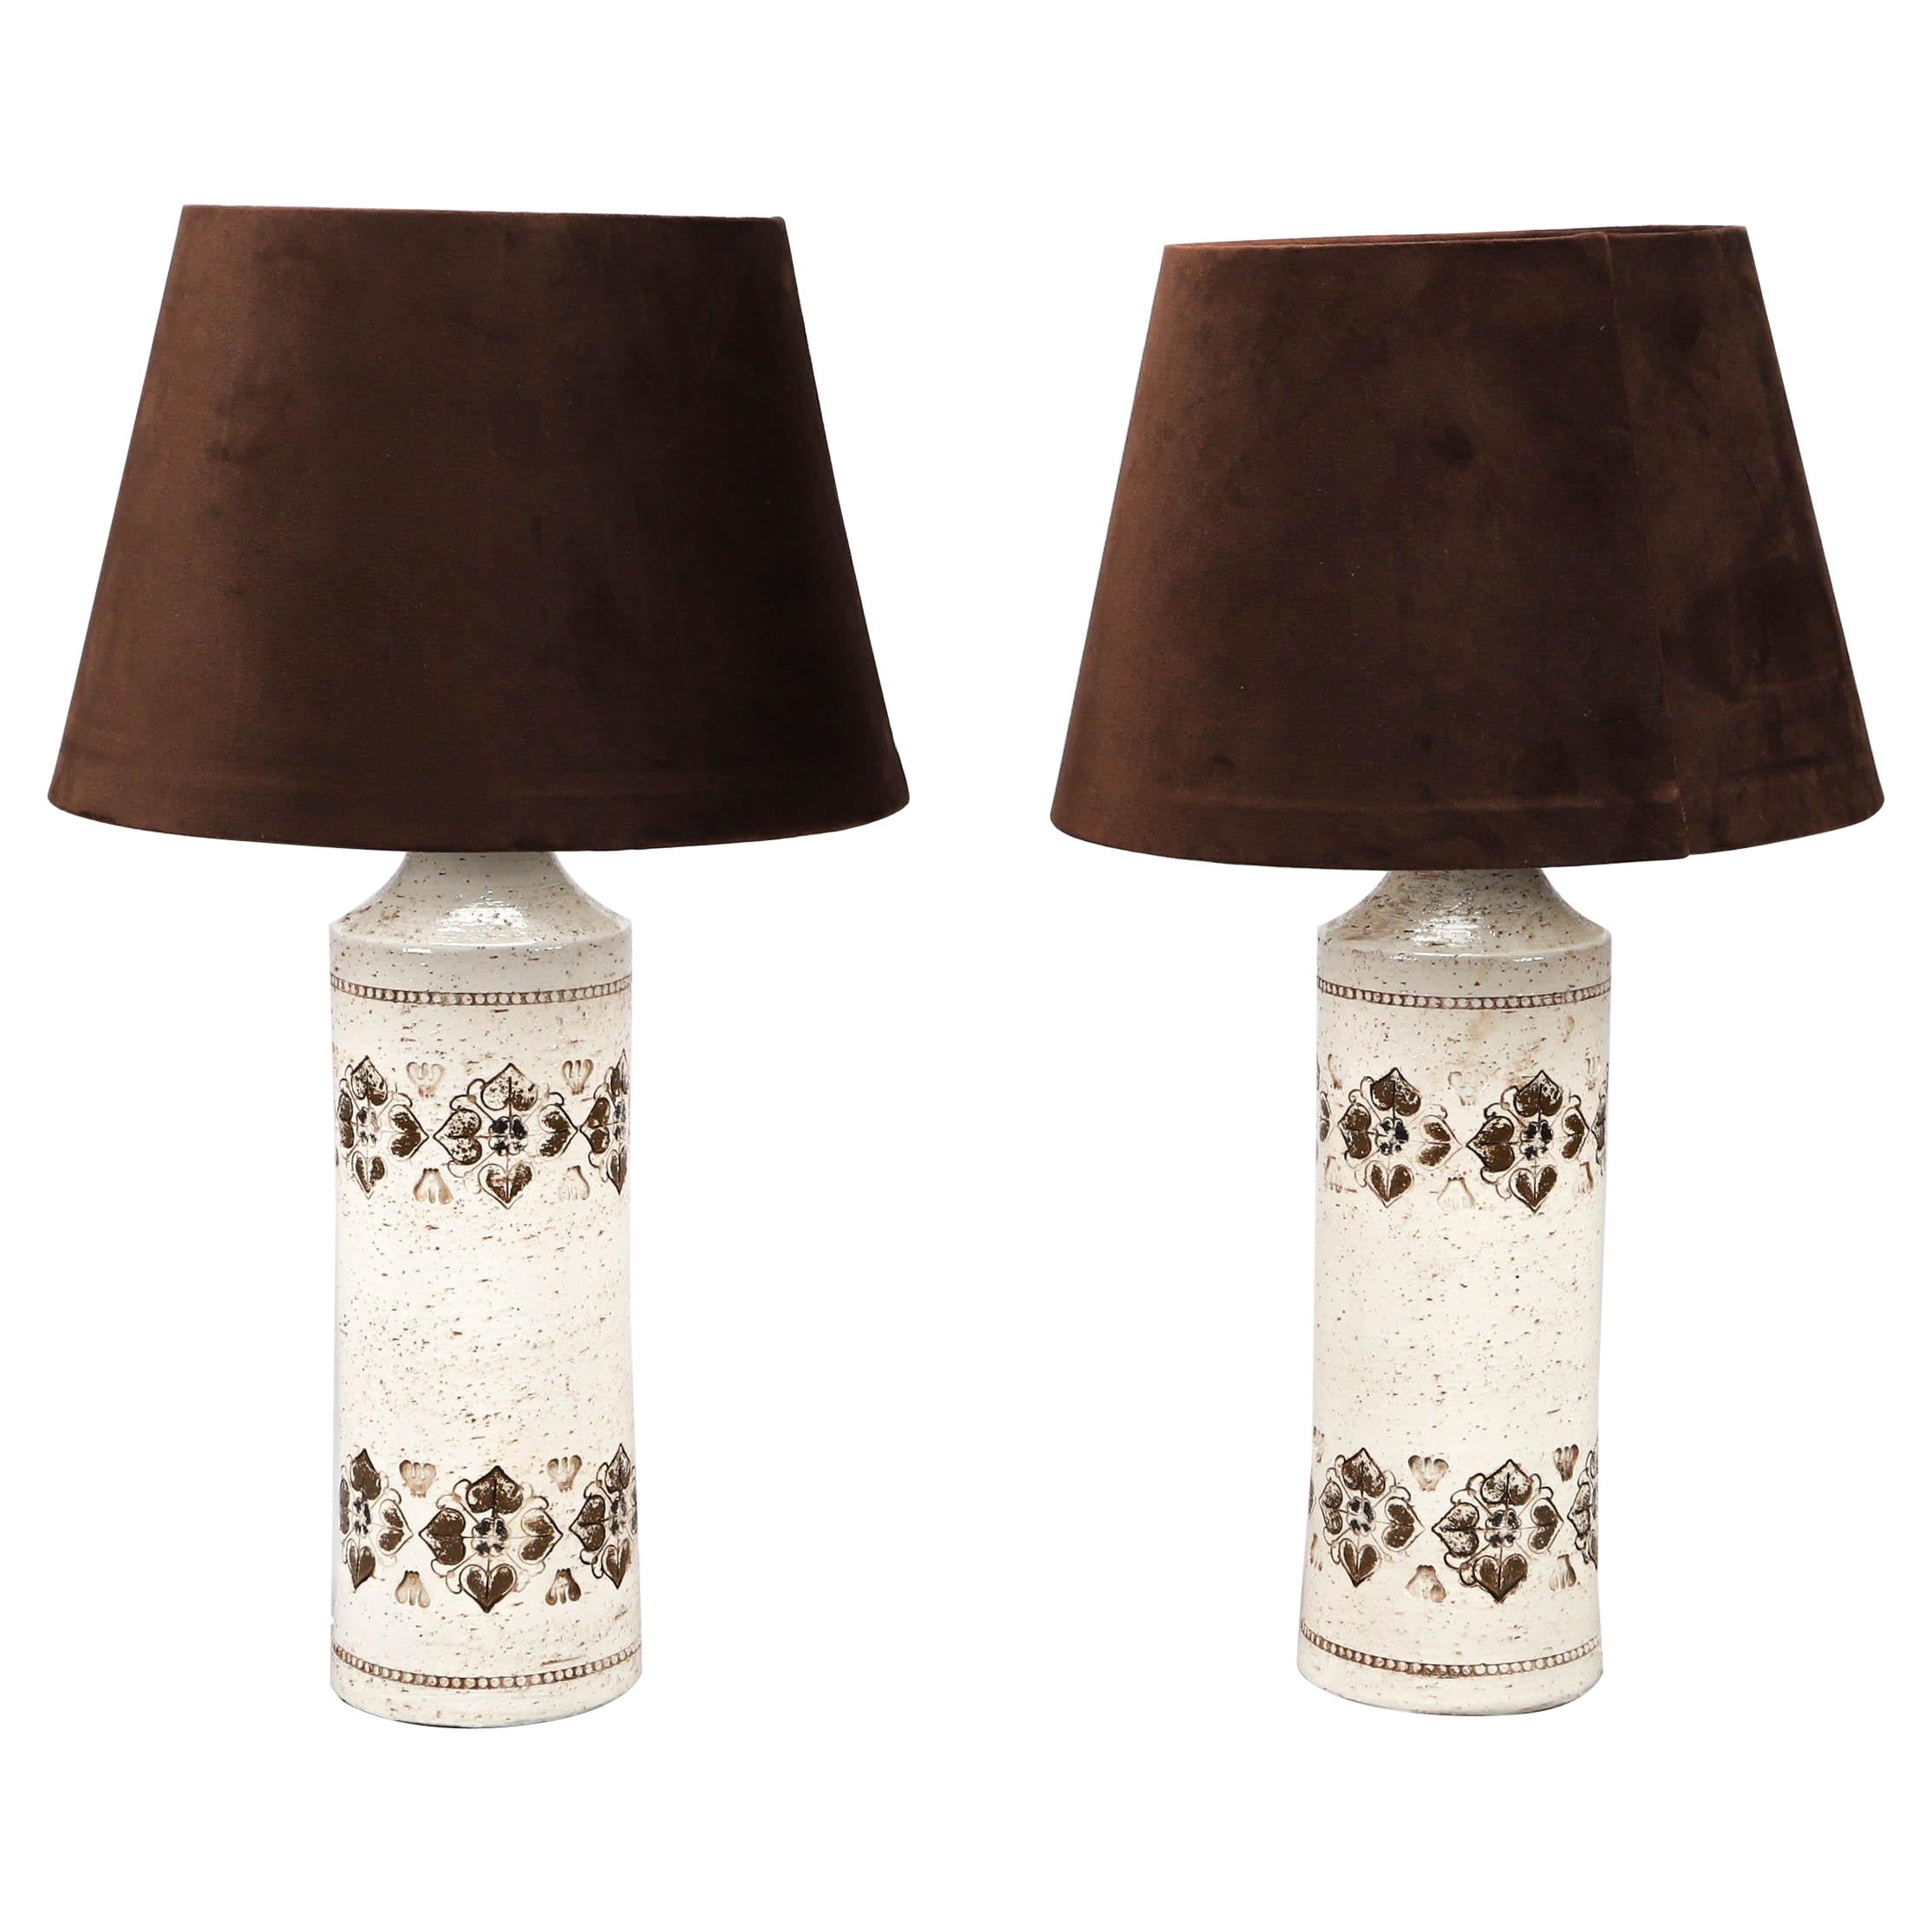 Bitossi lamps for Bergboms a pair in Ceramic Italy 1960 signed For Sale